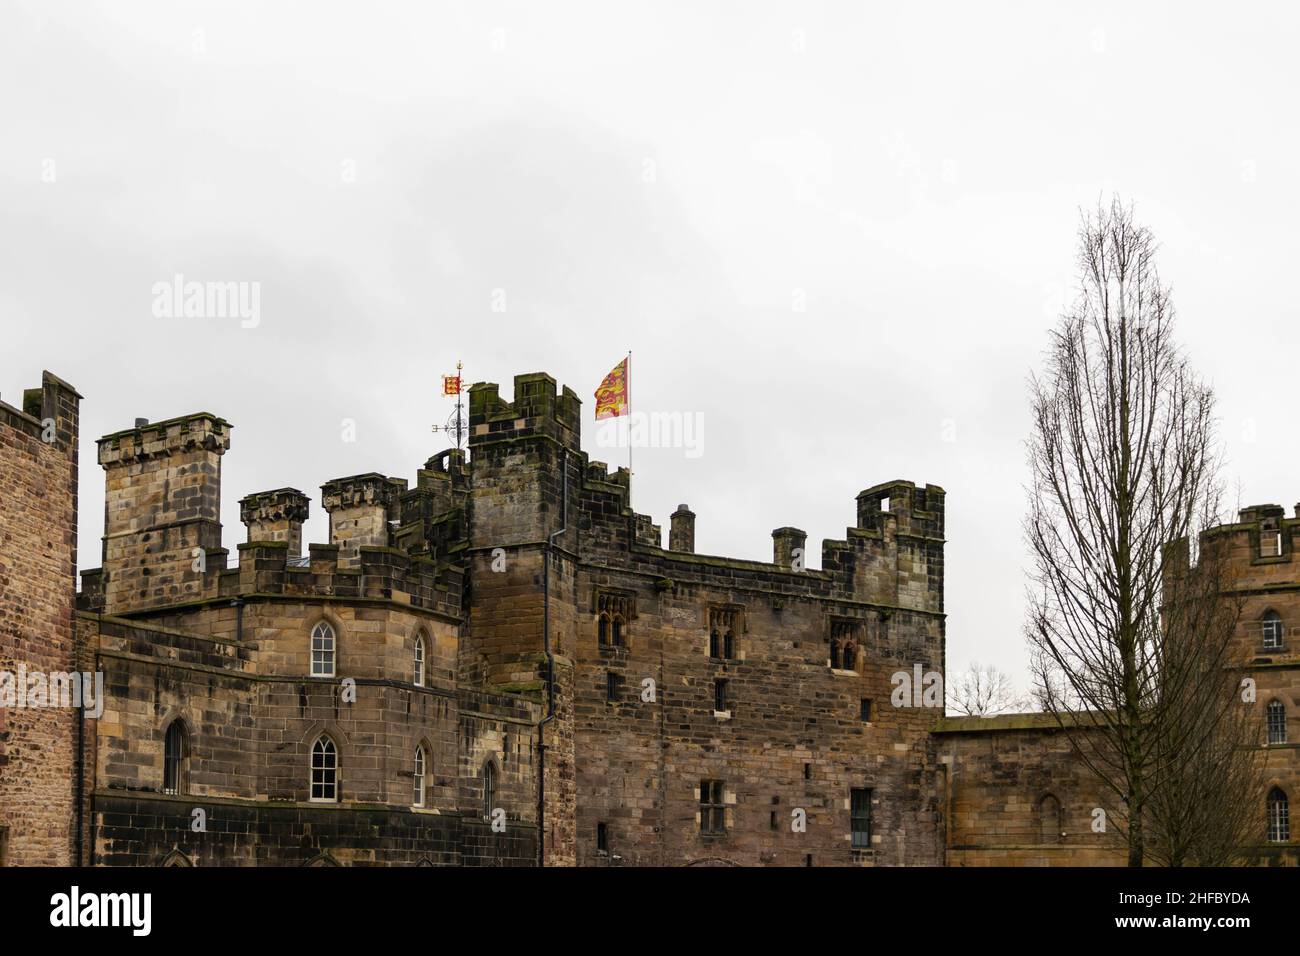 Lancaster castle, a medieval roman fortress used as a prison during the English Civil war. Now a popular visited site by locals and tourists. Inside g Stock Photo